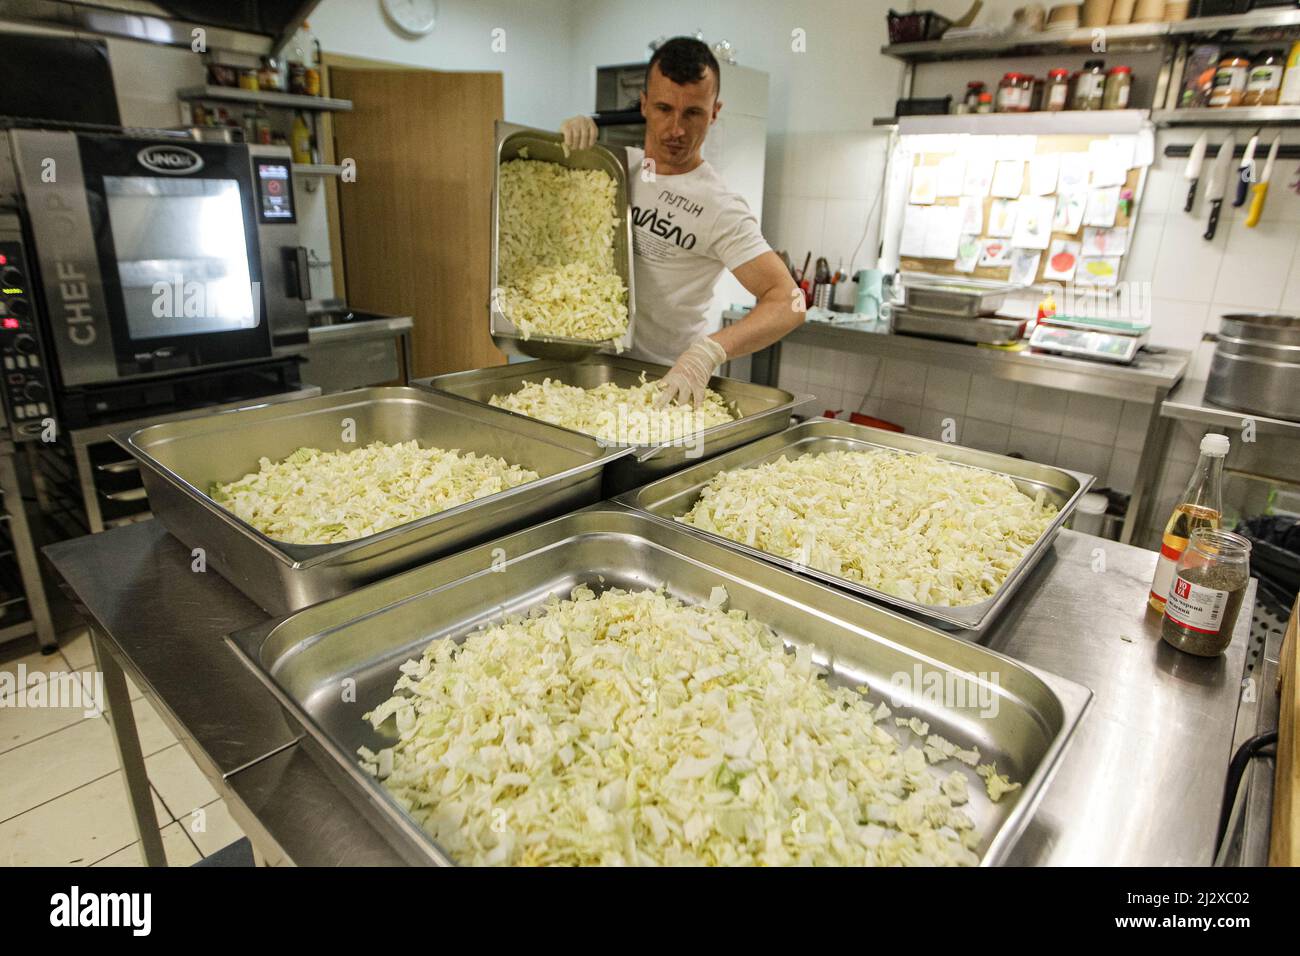 KYIV, UKRAINE - APRIL 1, 2022 - A cook is seen at work as nearly 400 meals for Territorial Defence Forces, Ukrainian Railways workers, sappers, border Stock Photo